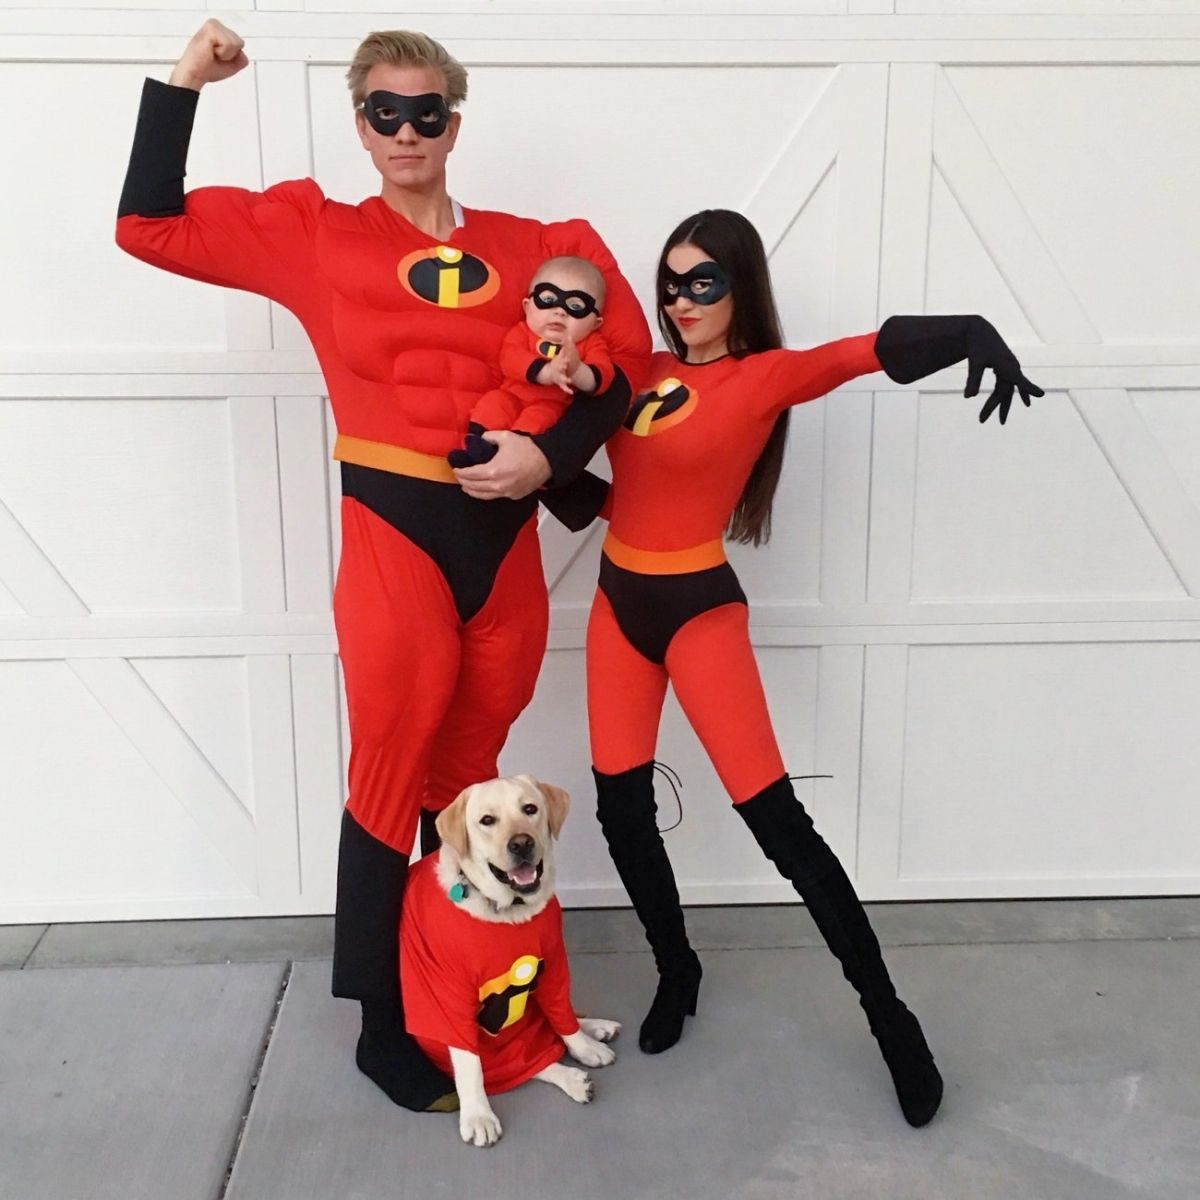 Incredibles costumes